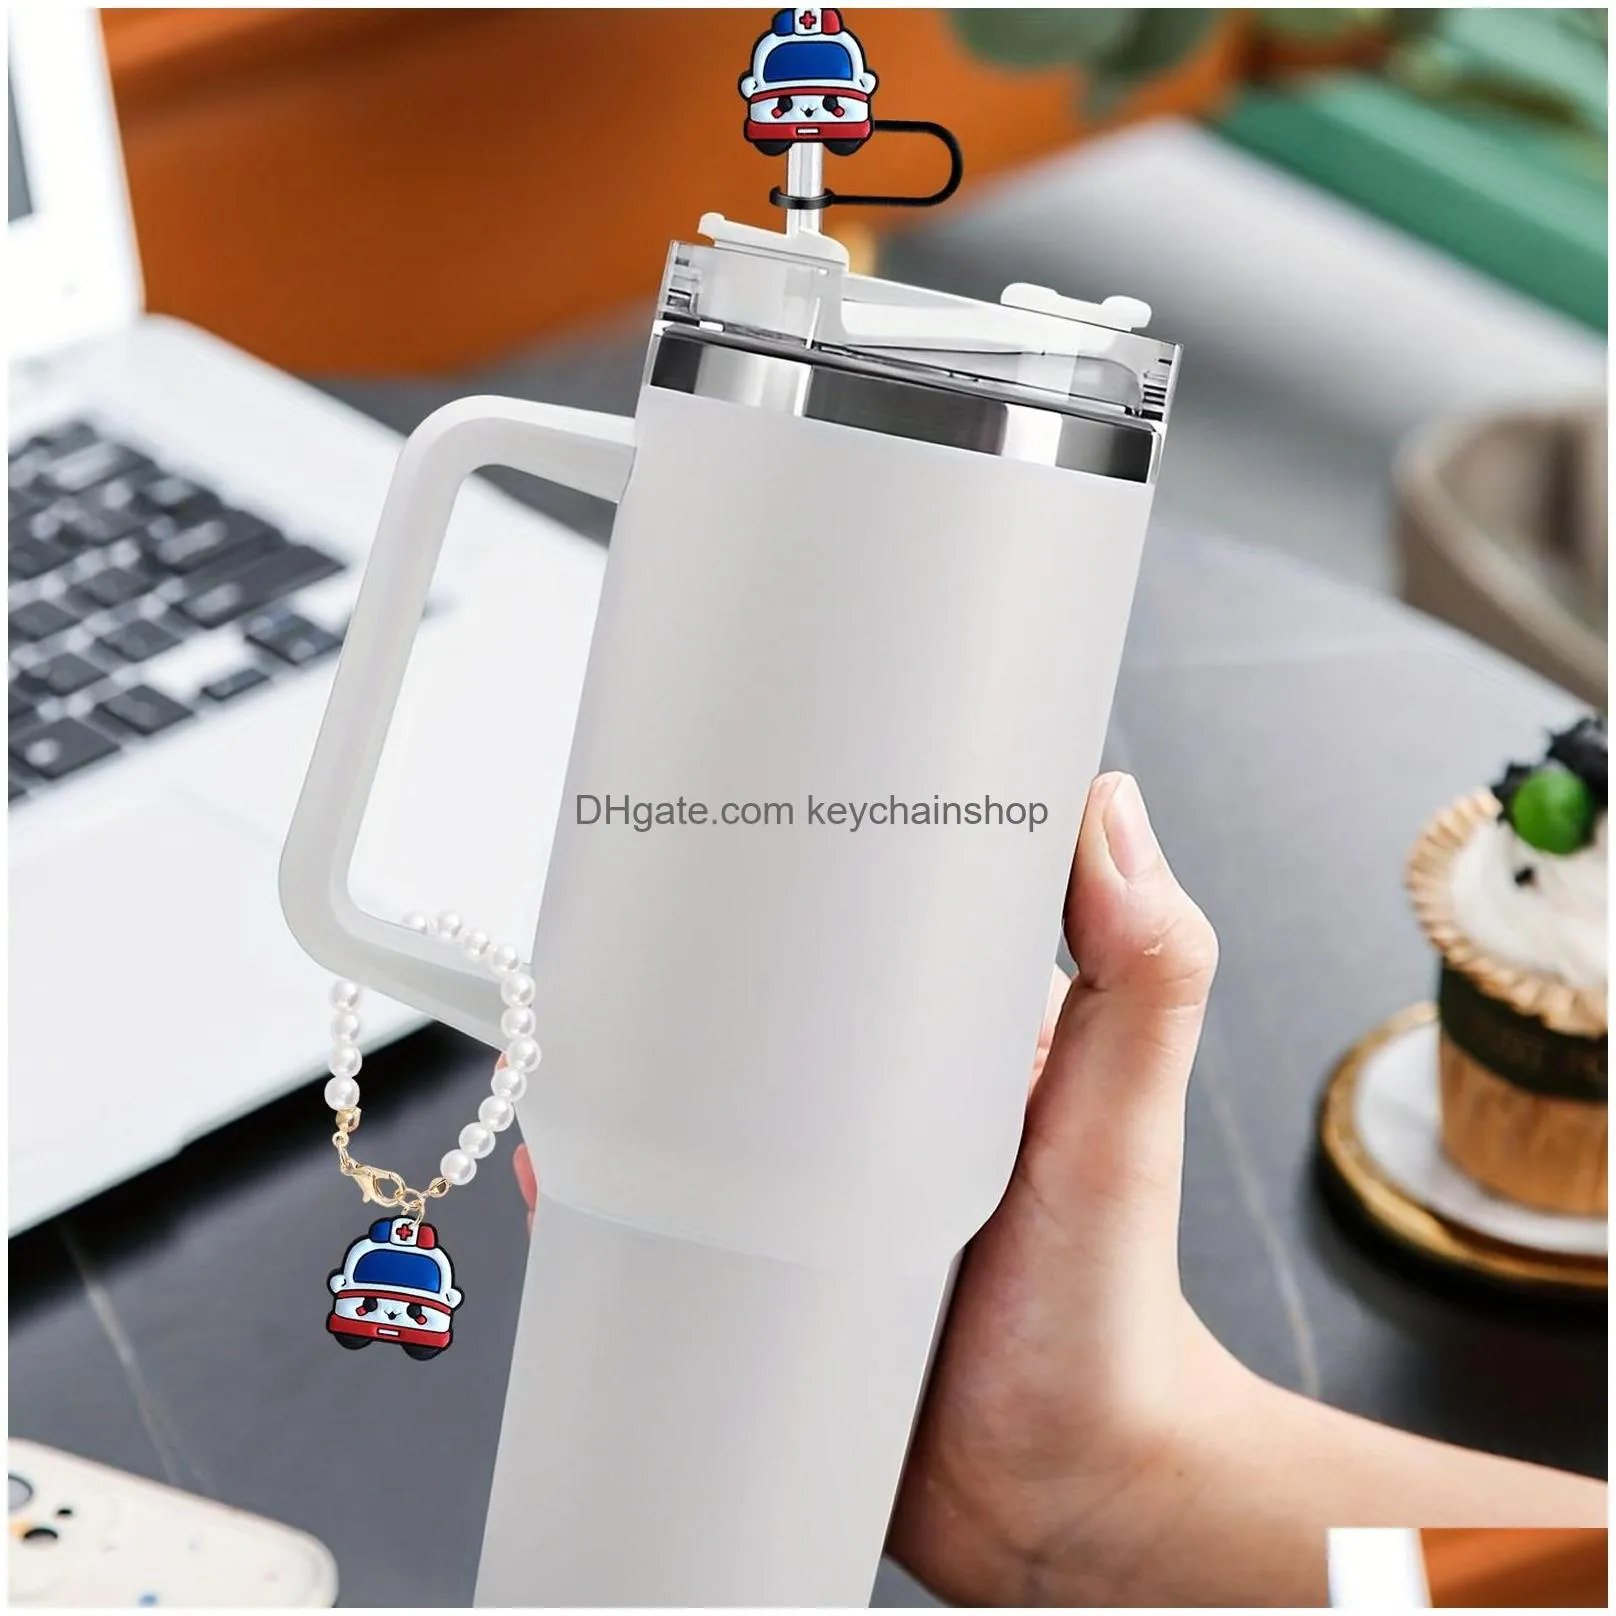 school supplies charm accessories for 40oz cup and simple modern tumbler with handle sile key chain